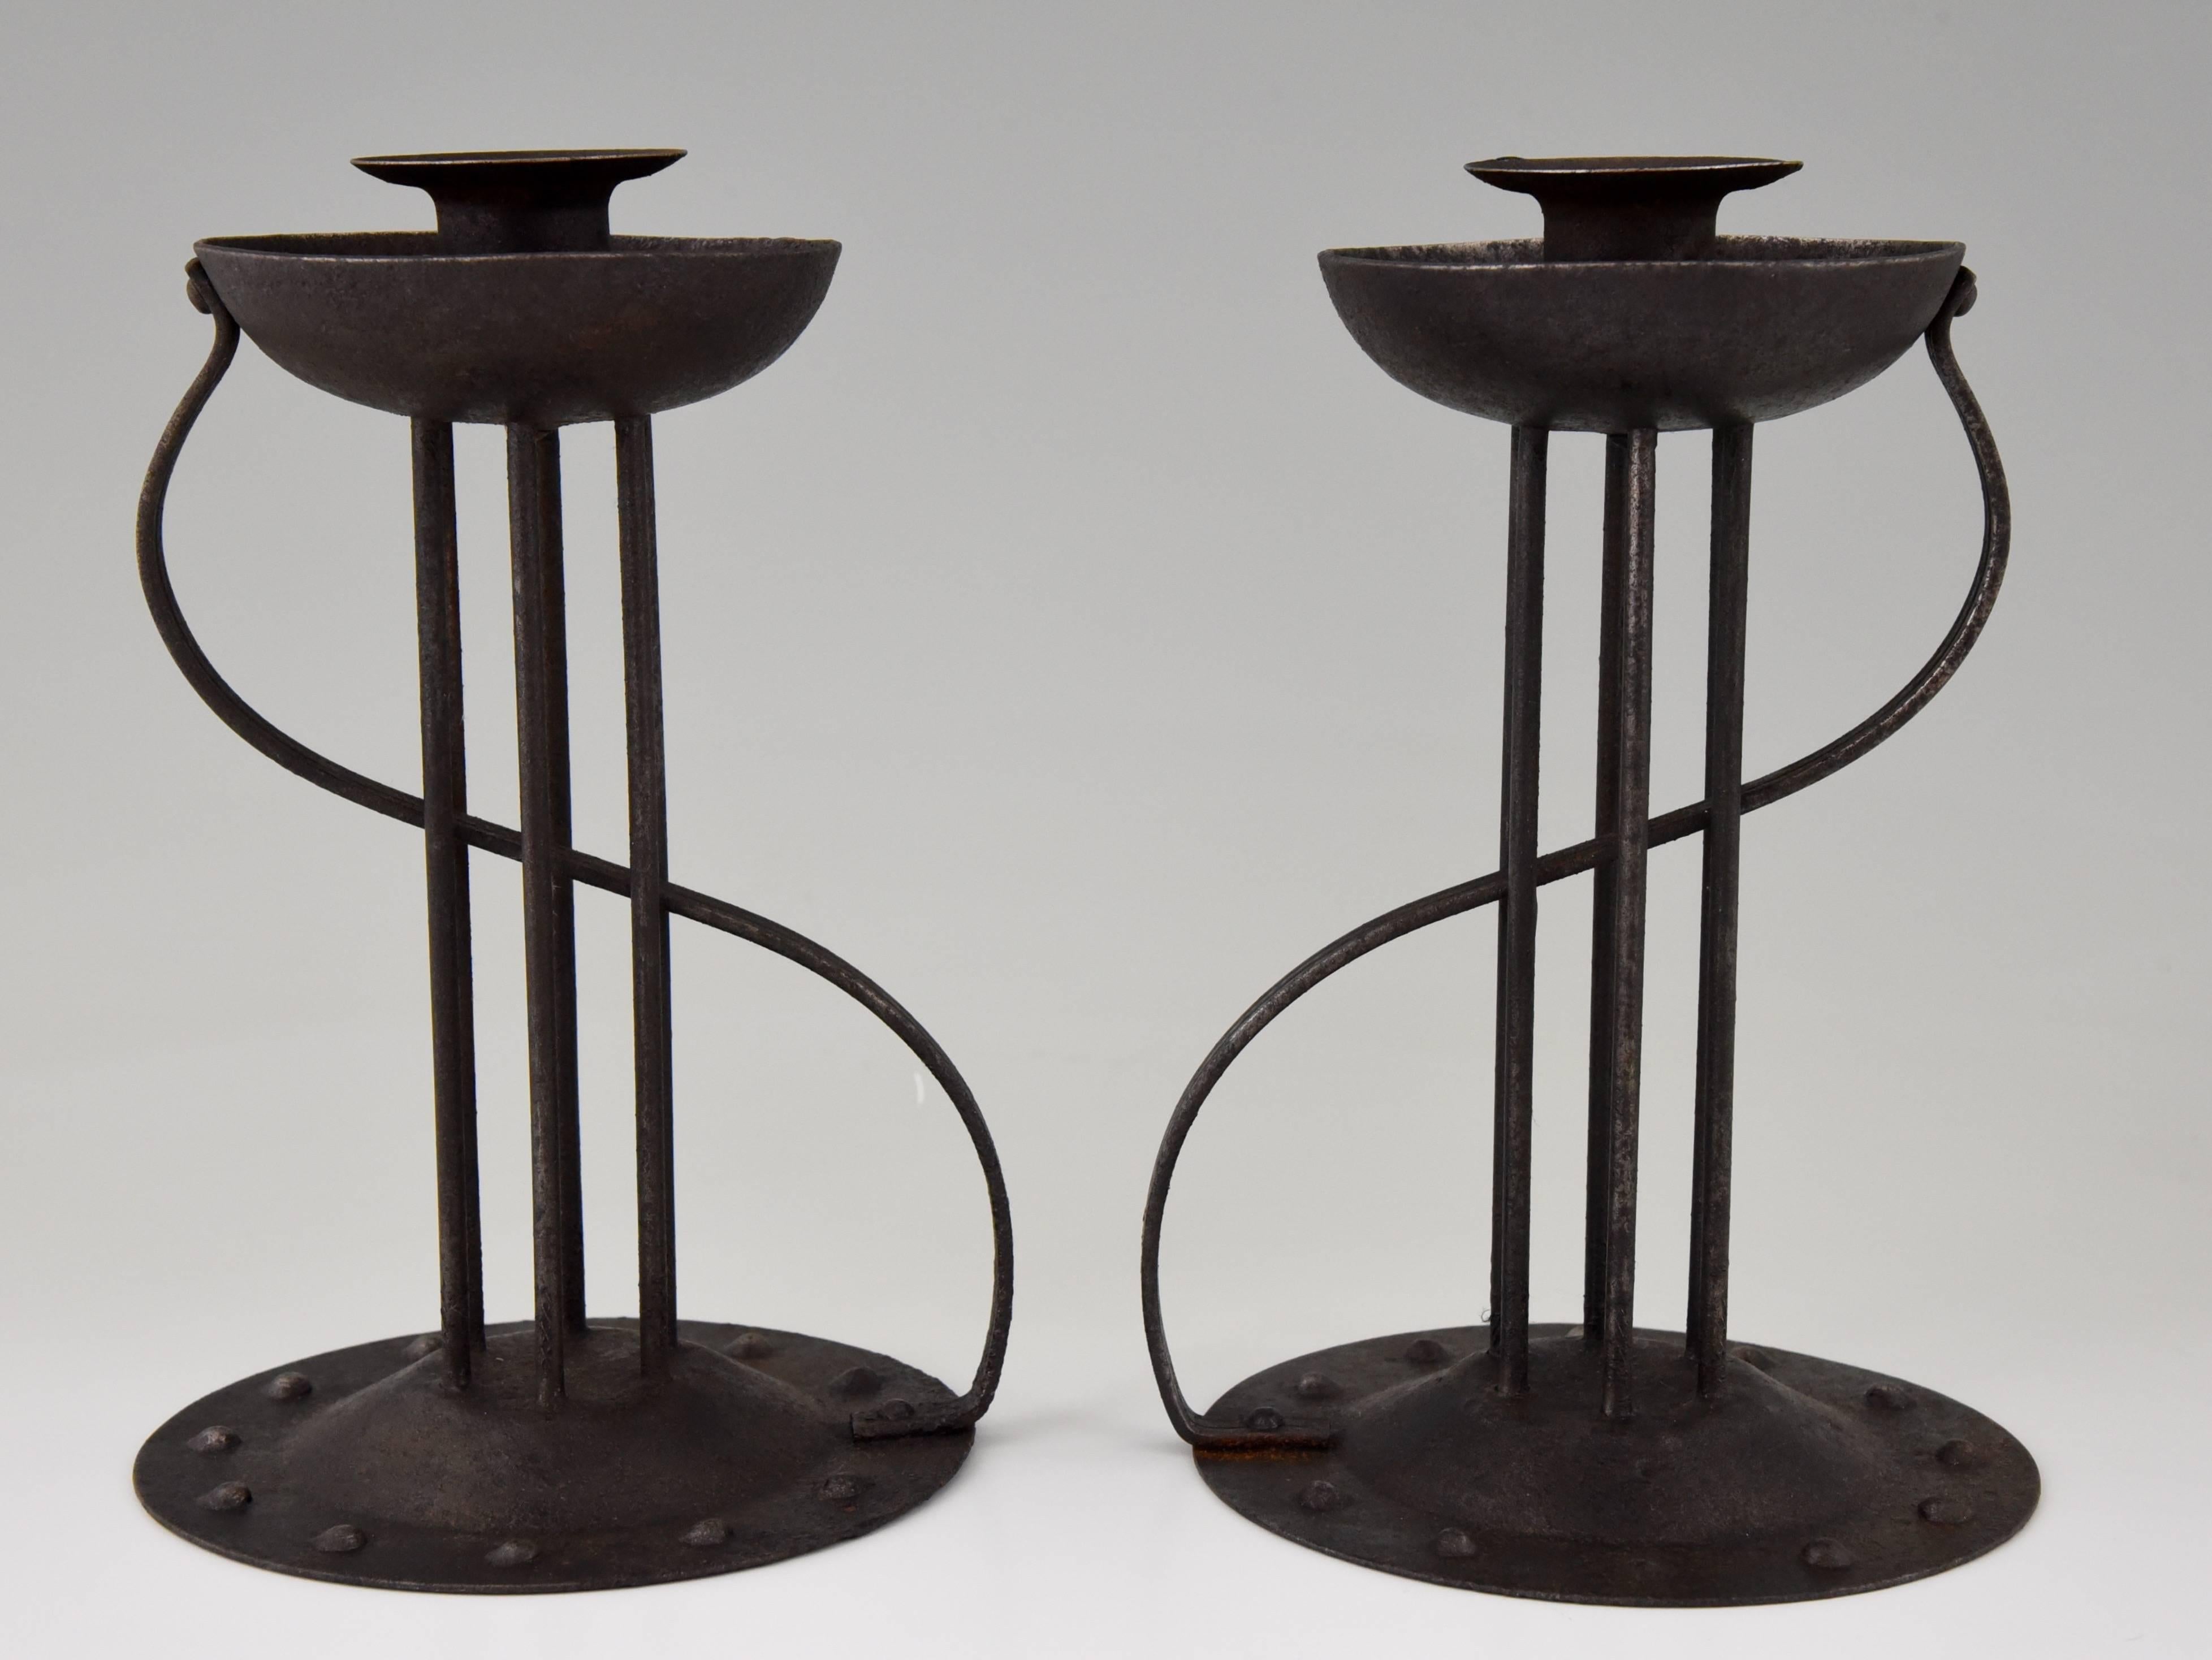 A pair of Art Nouveau wrought and hammered iron candlesticks by Goberg for Hugo bergere.

Artist / maker:
Goberg Hugo bergere. 
Signature / Marks:
Stamped Goberg.
Style:
Art Nouveau. 
Date:
1905-1910.
Material:
Hammered wrought